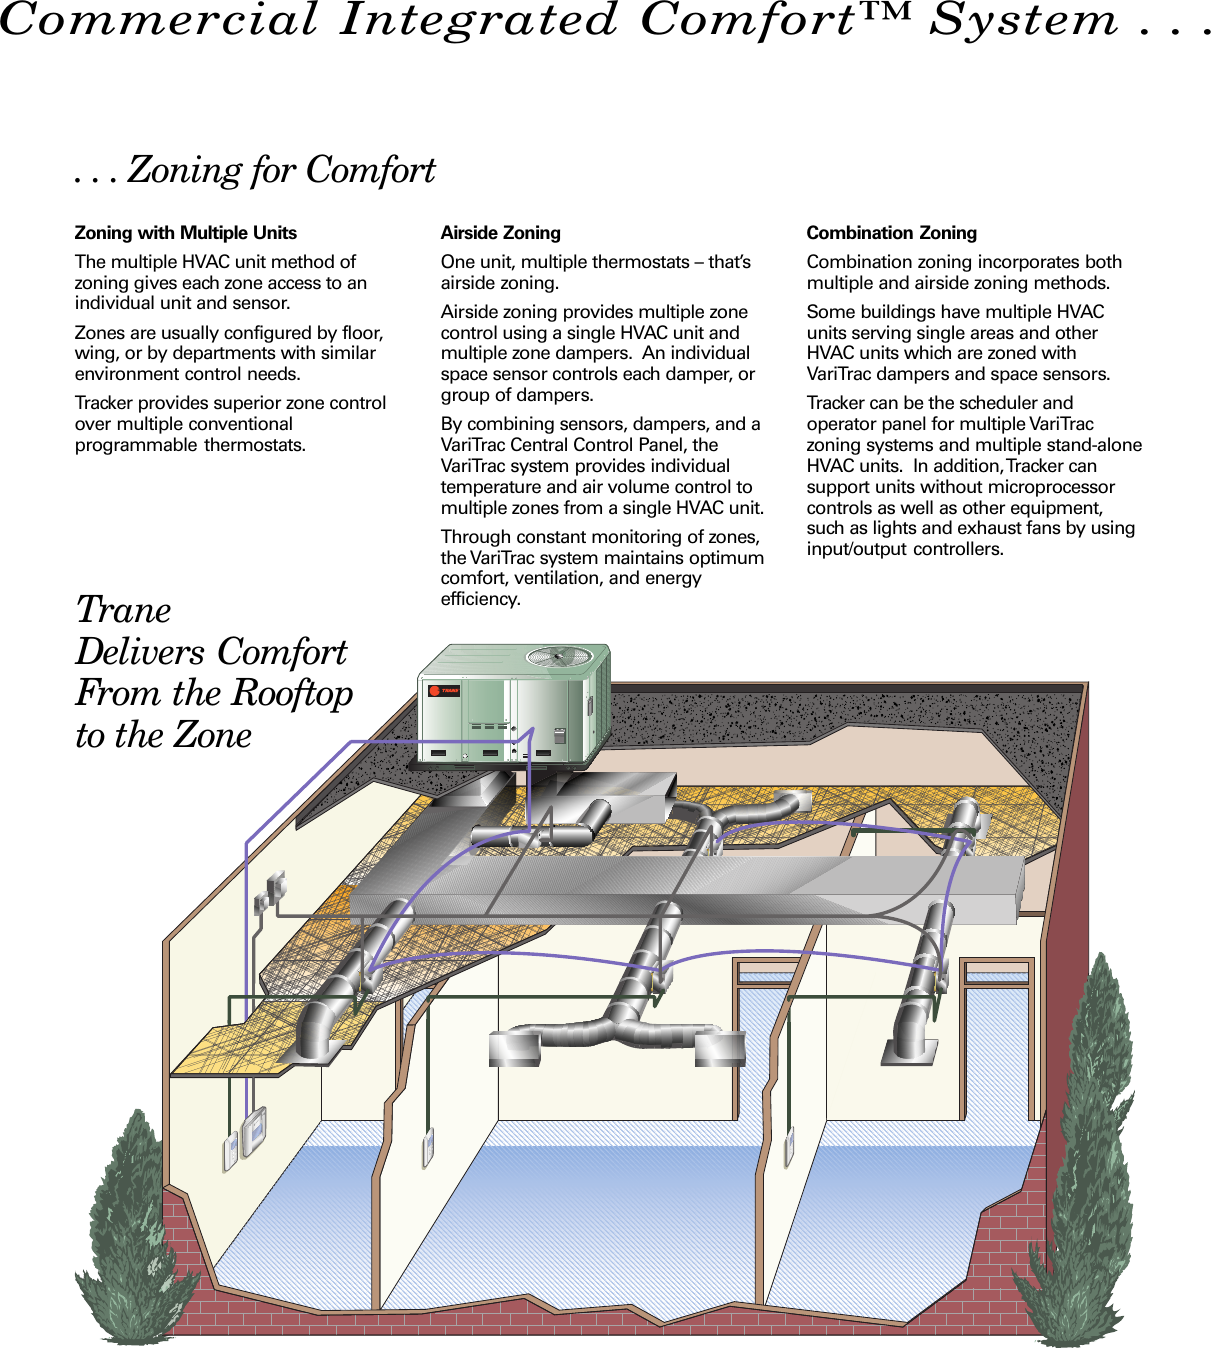 Page 3 of 6 - Trane Trane-Varitrac-Dampers-Brochure- UN-SLB002-EN 10/01/2004 Light Commercial Integrated Comfort System  Smart Rooftops , Controls Choice Trane-varitrac-dampers-brochure